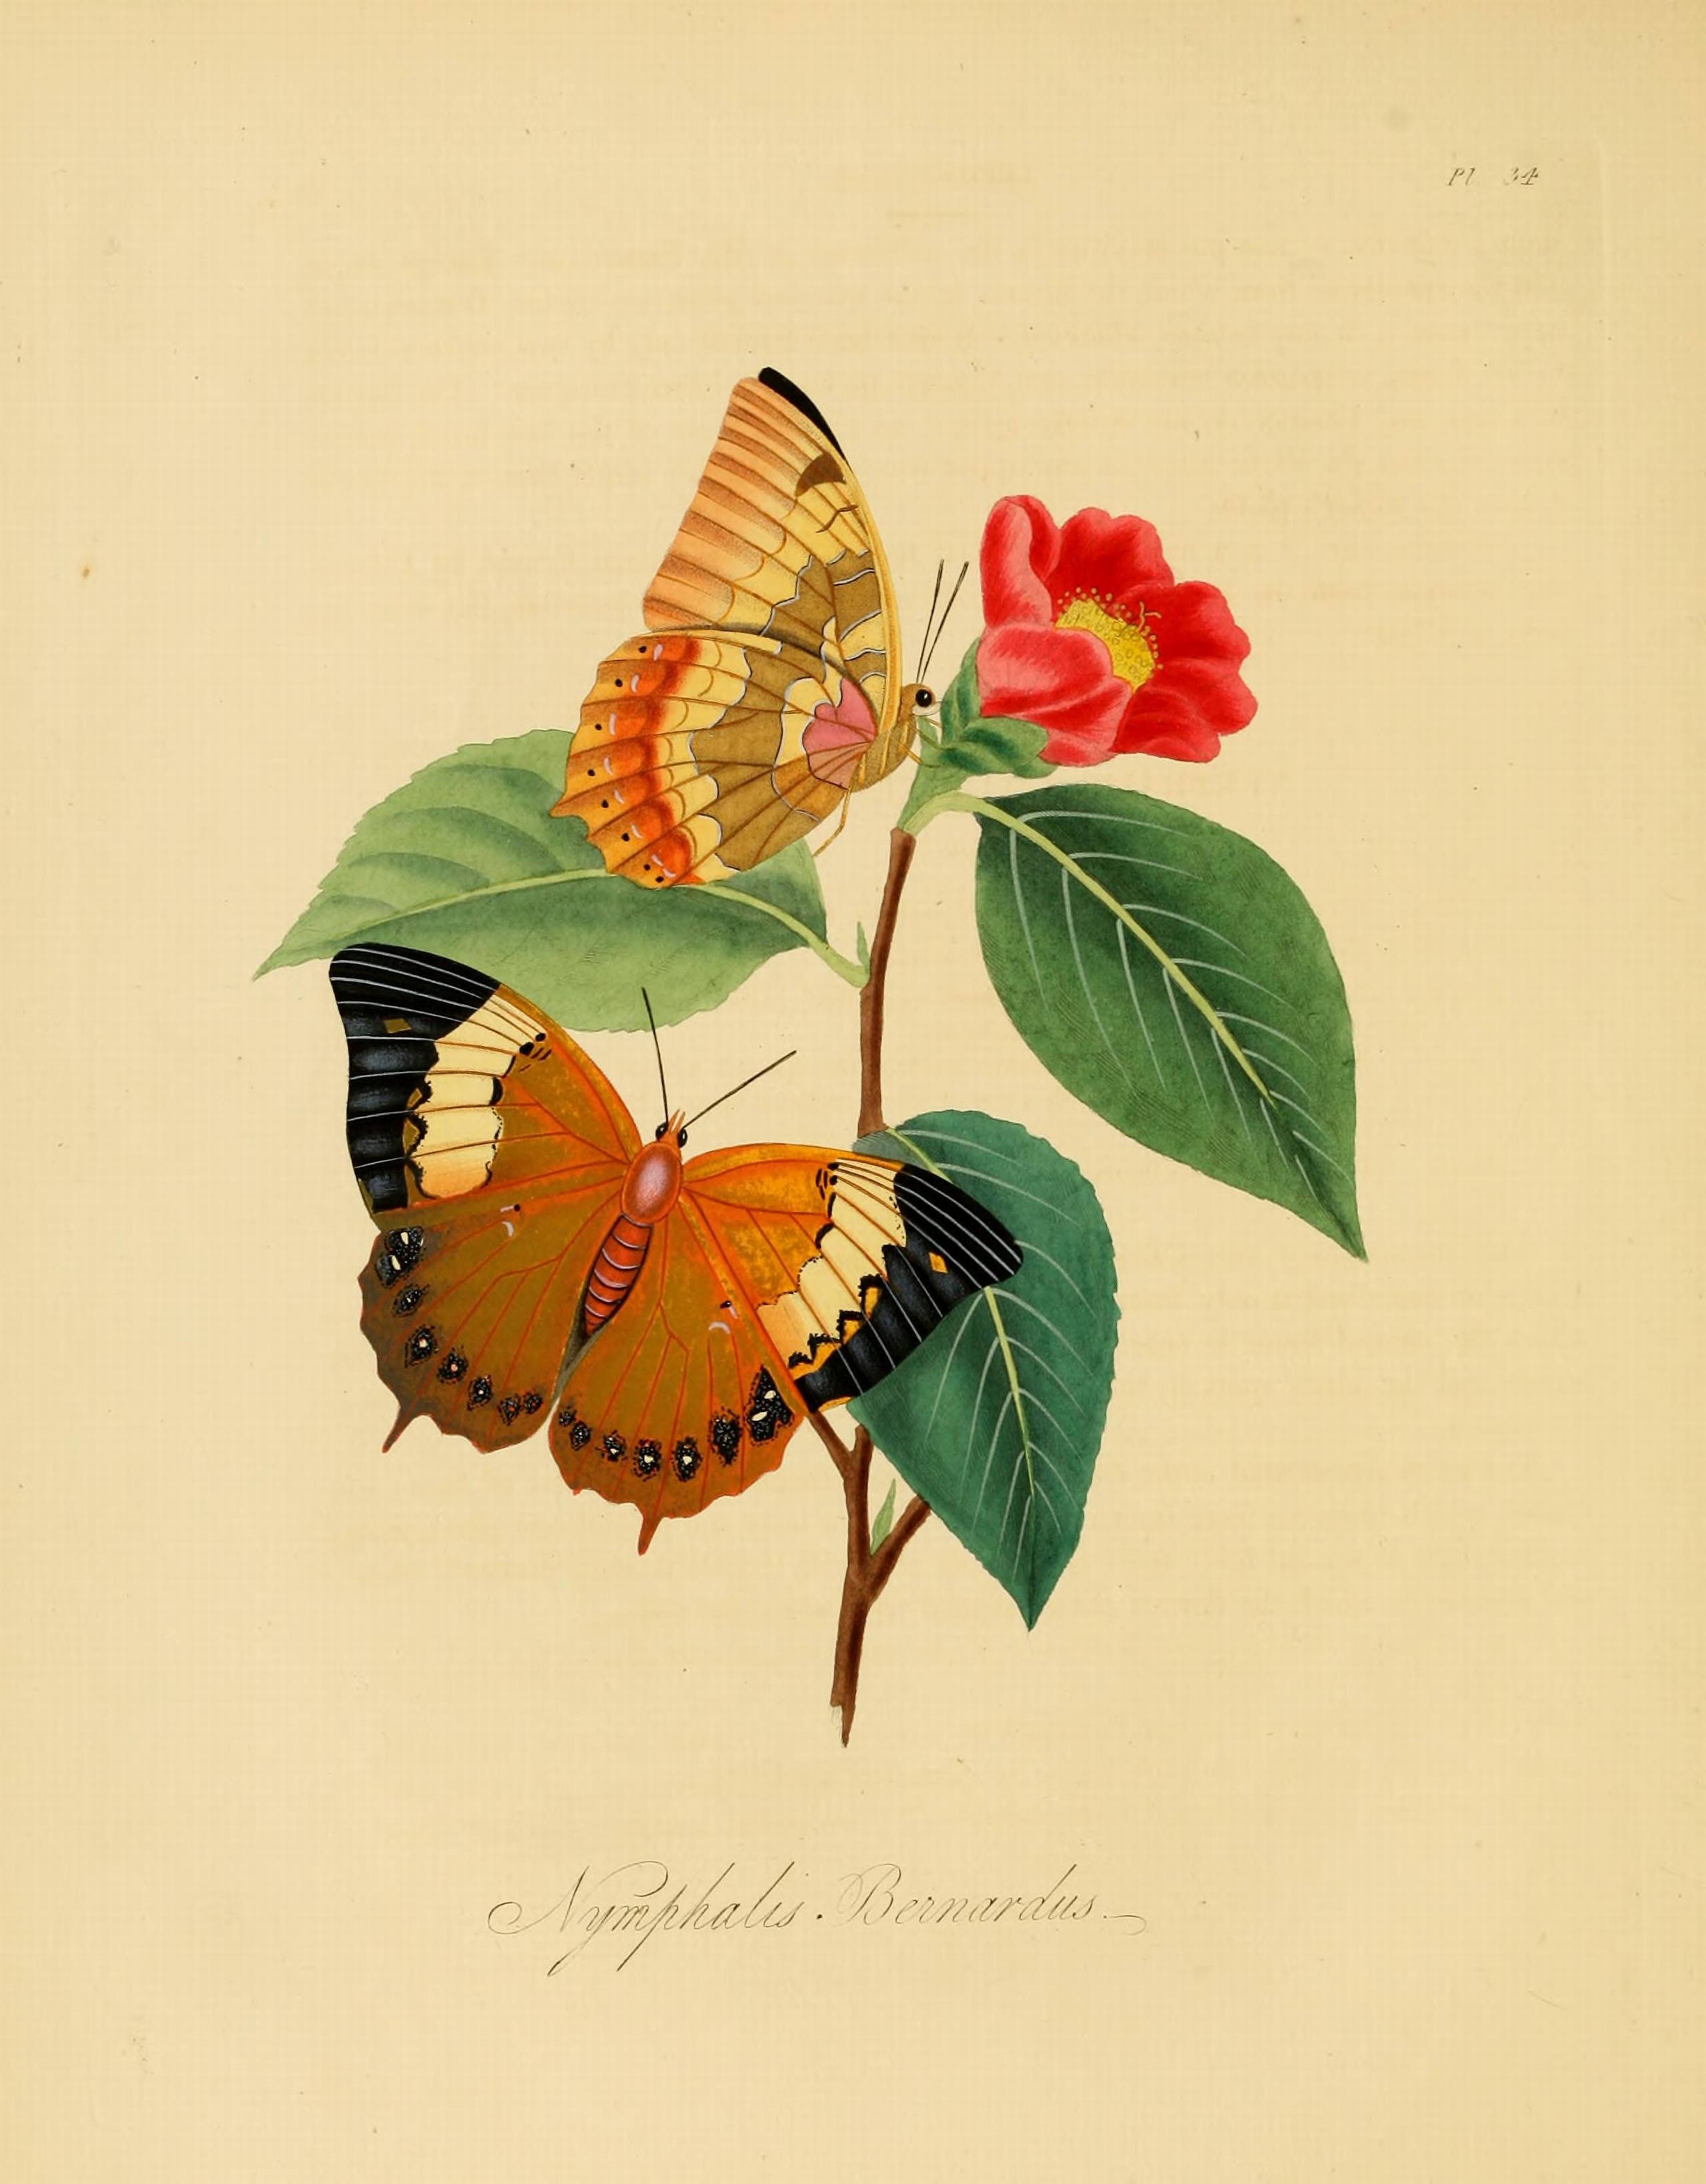 Donovan - Insects of China, 1838 - pl 34